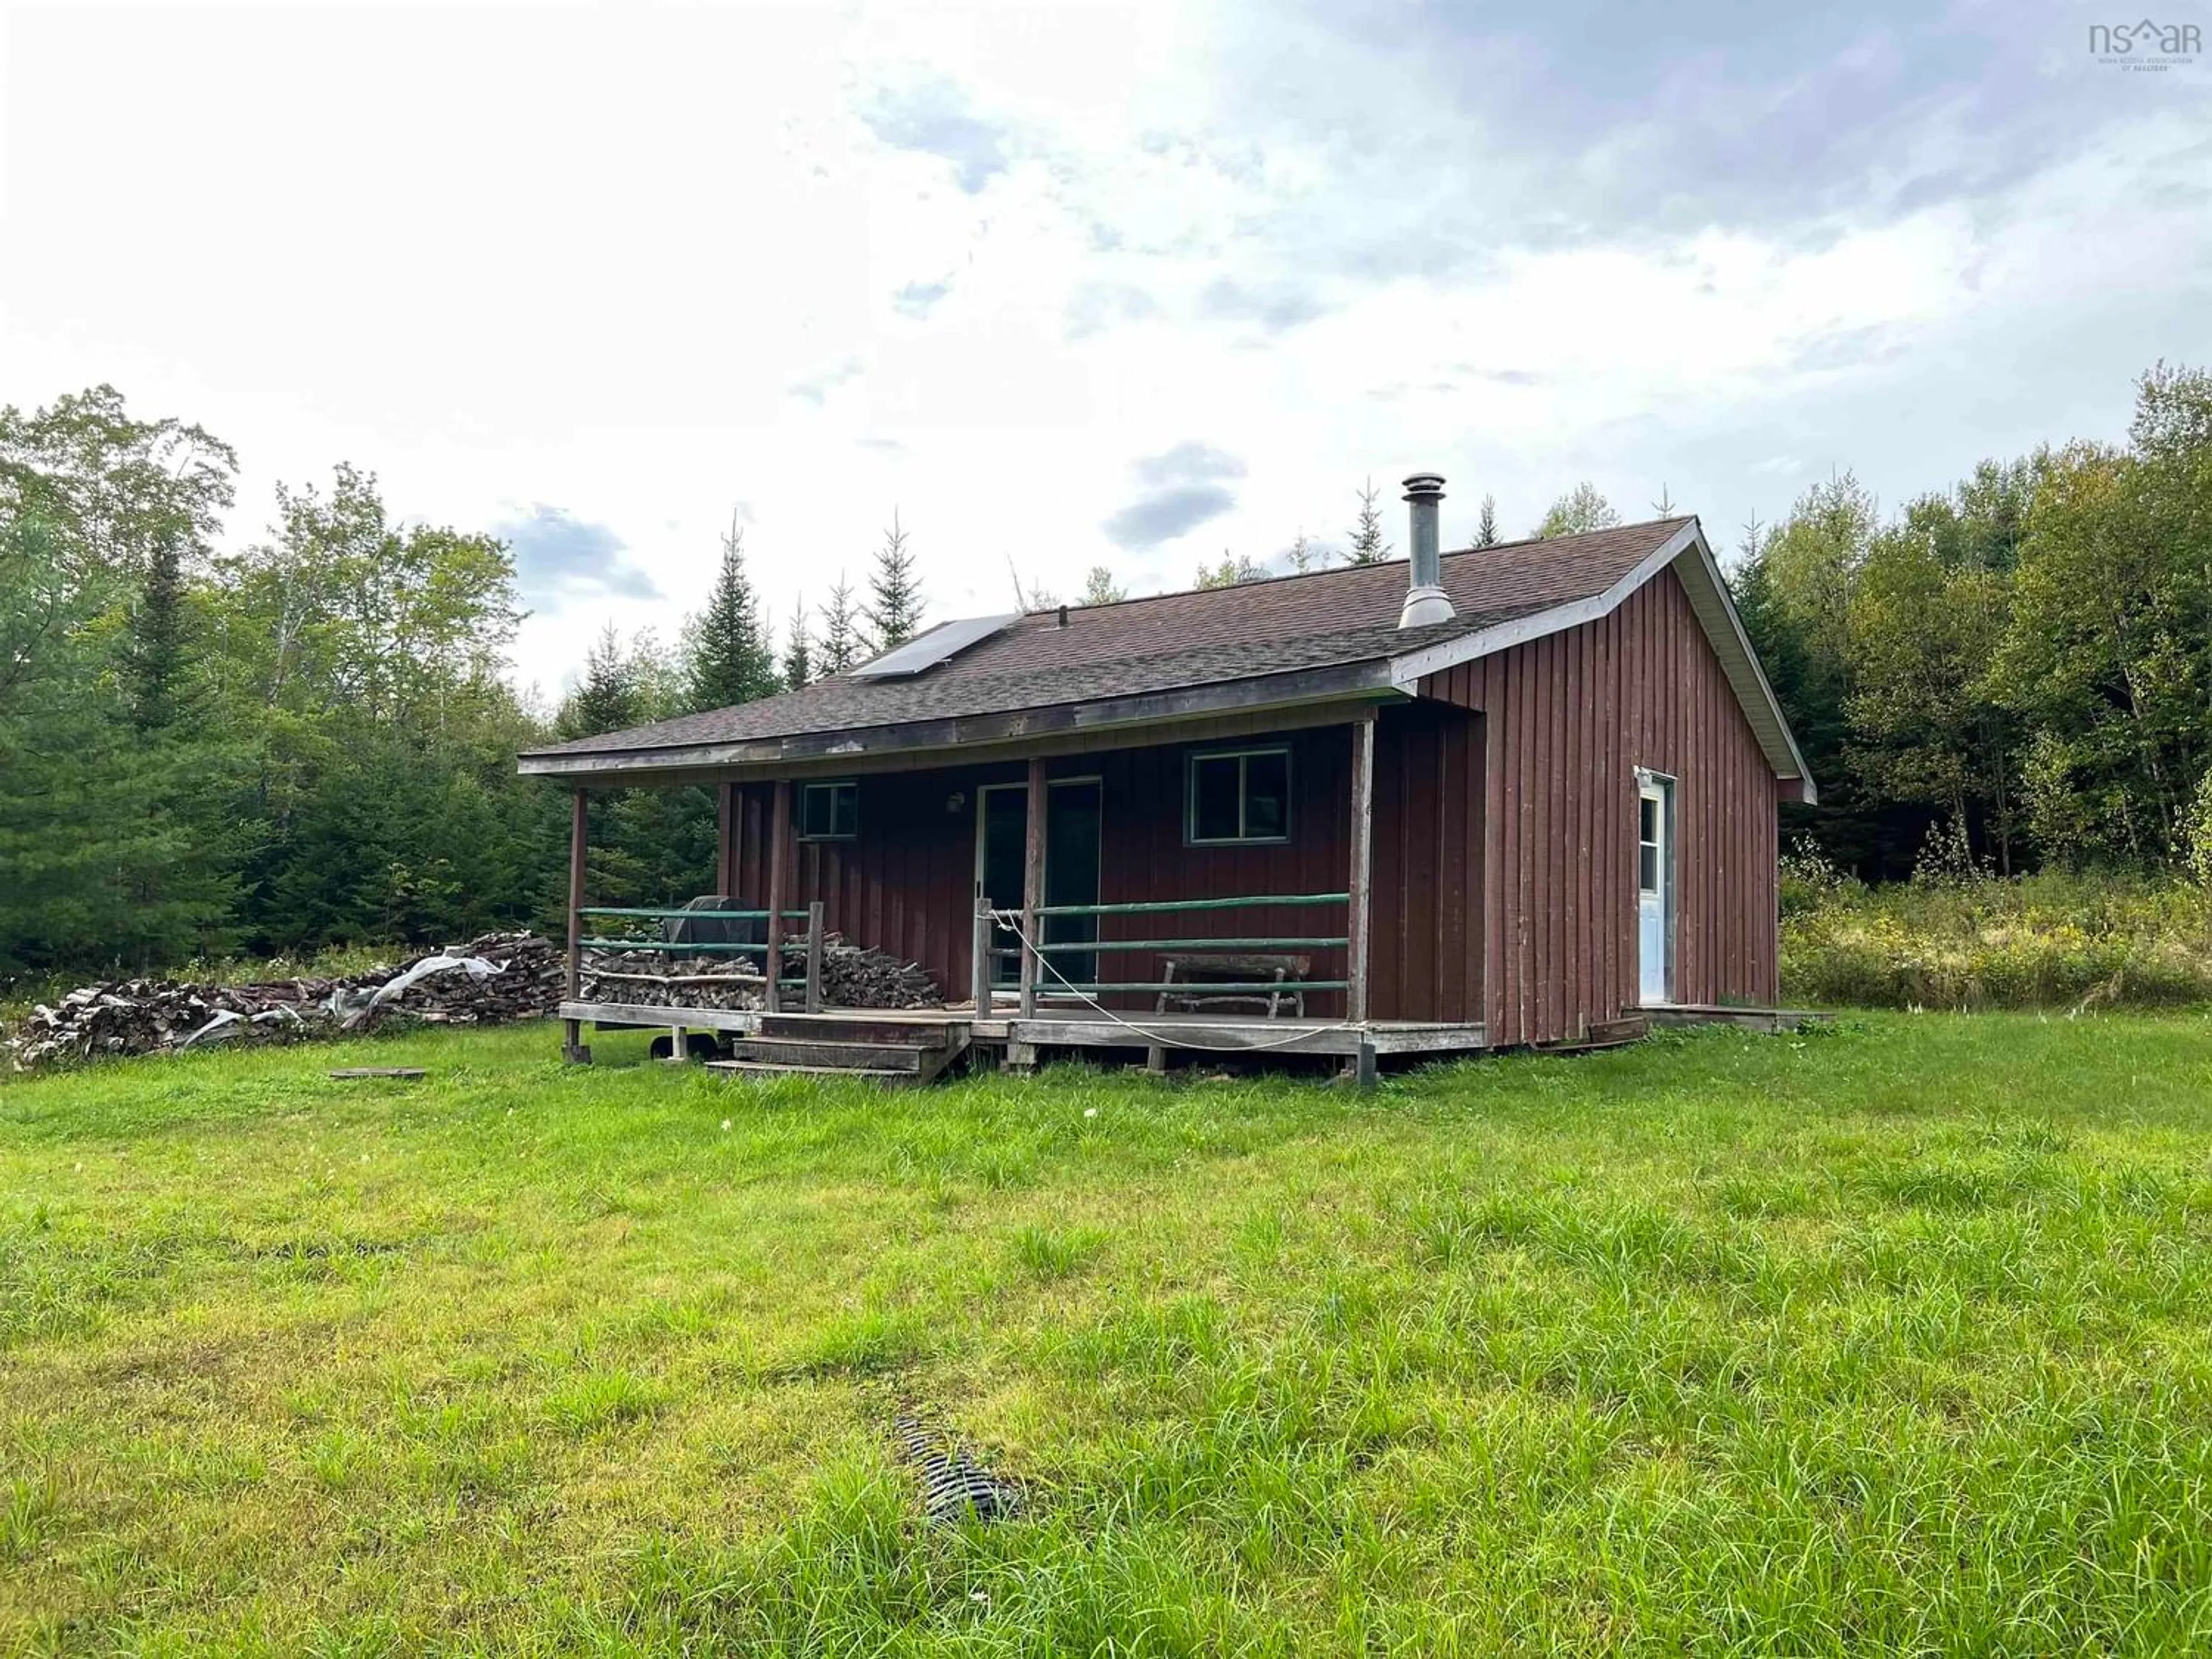 Home with unknown exterior material for Lot 94 Old Glenmore Rd, Elmsvale Nova Scotia B0N 1X0